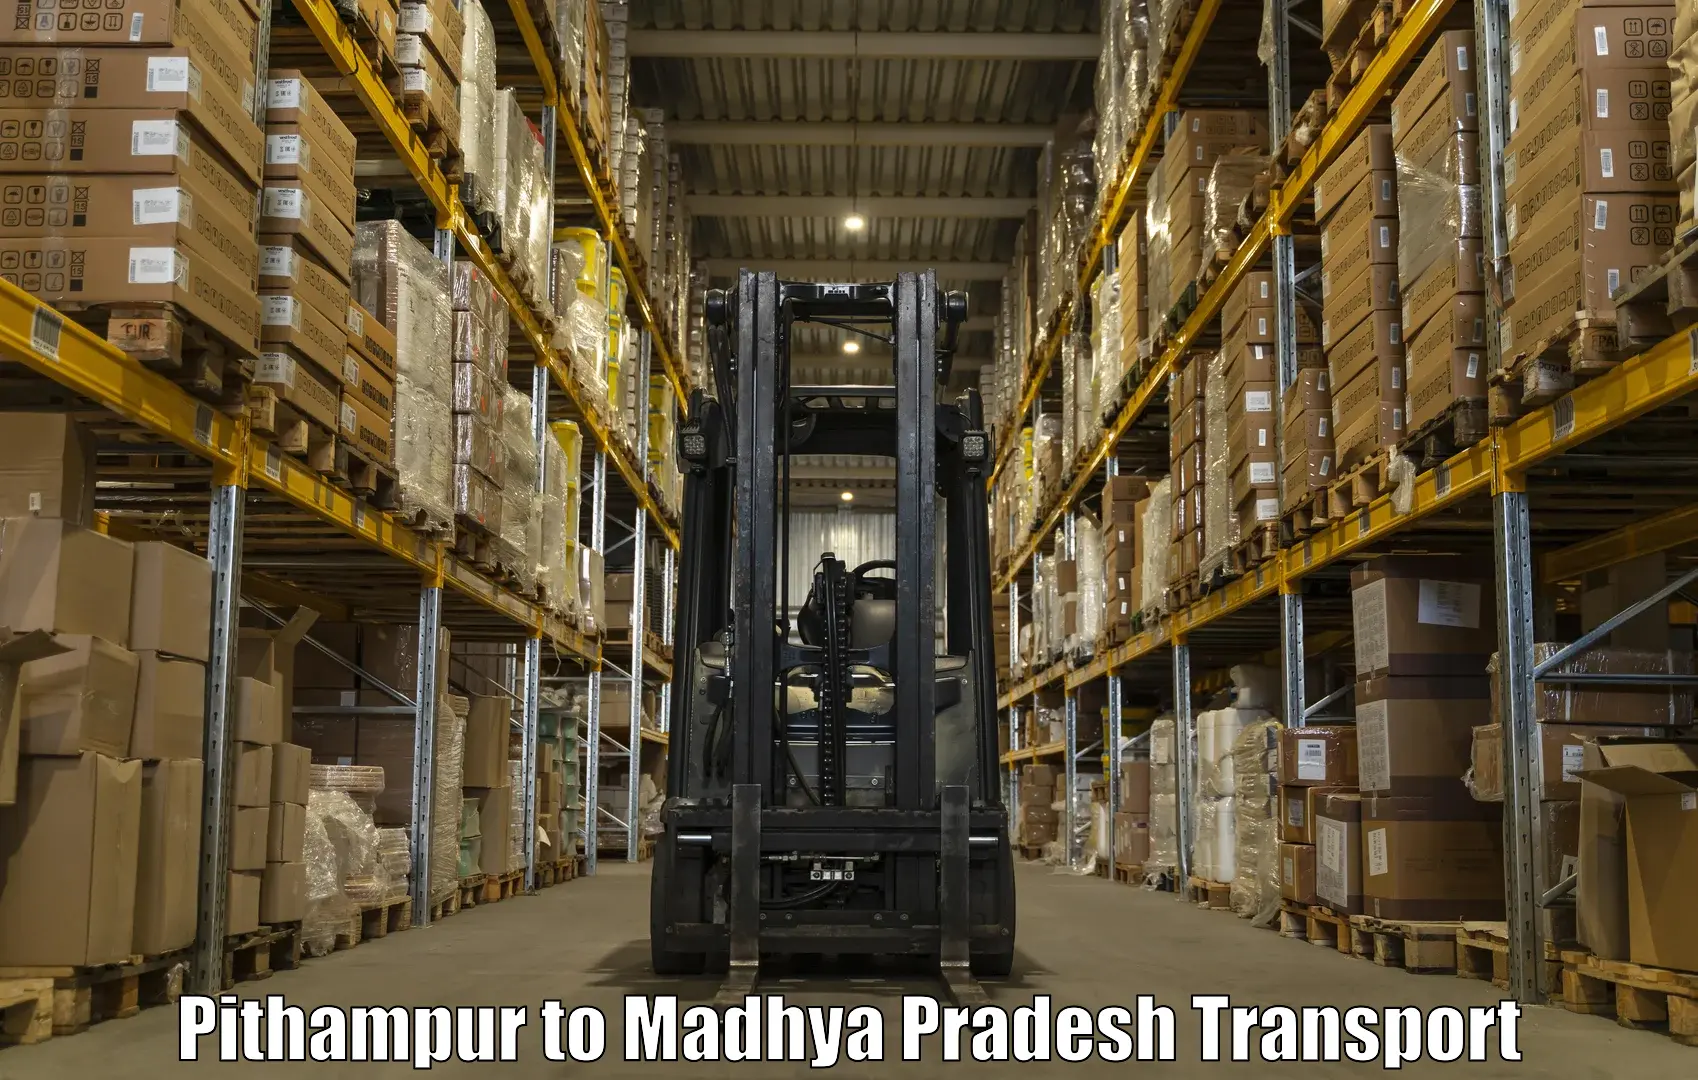 Air freight transport services Pithampur to Khandwa